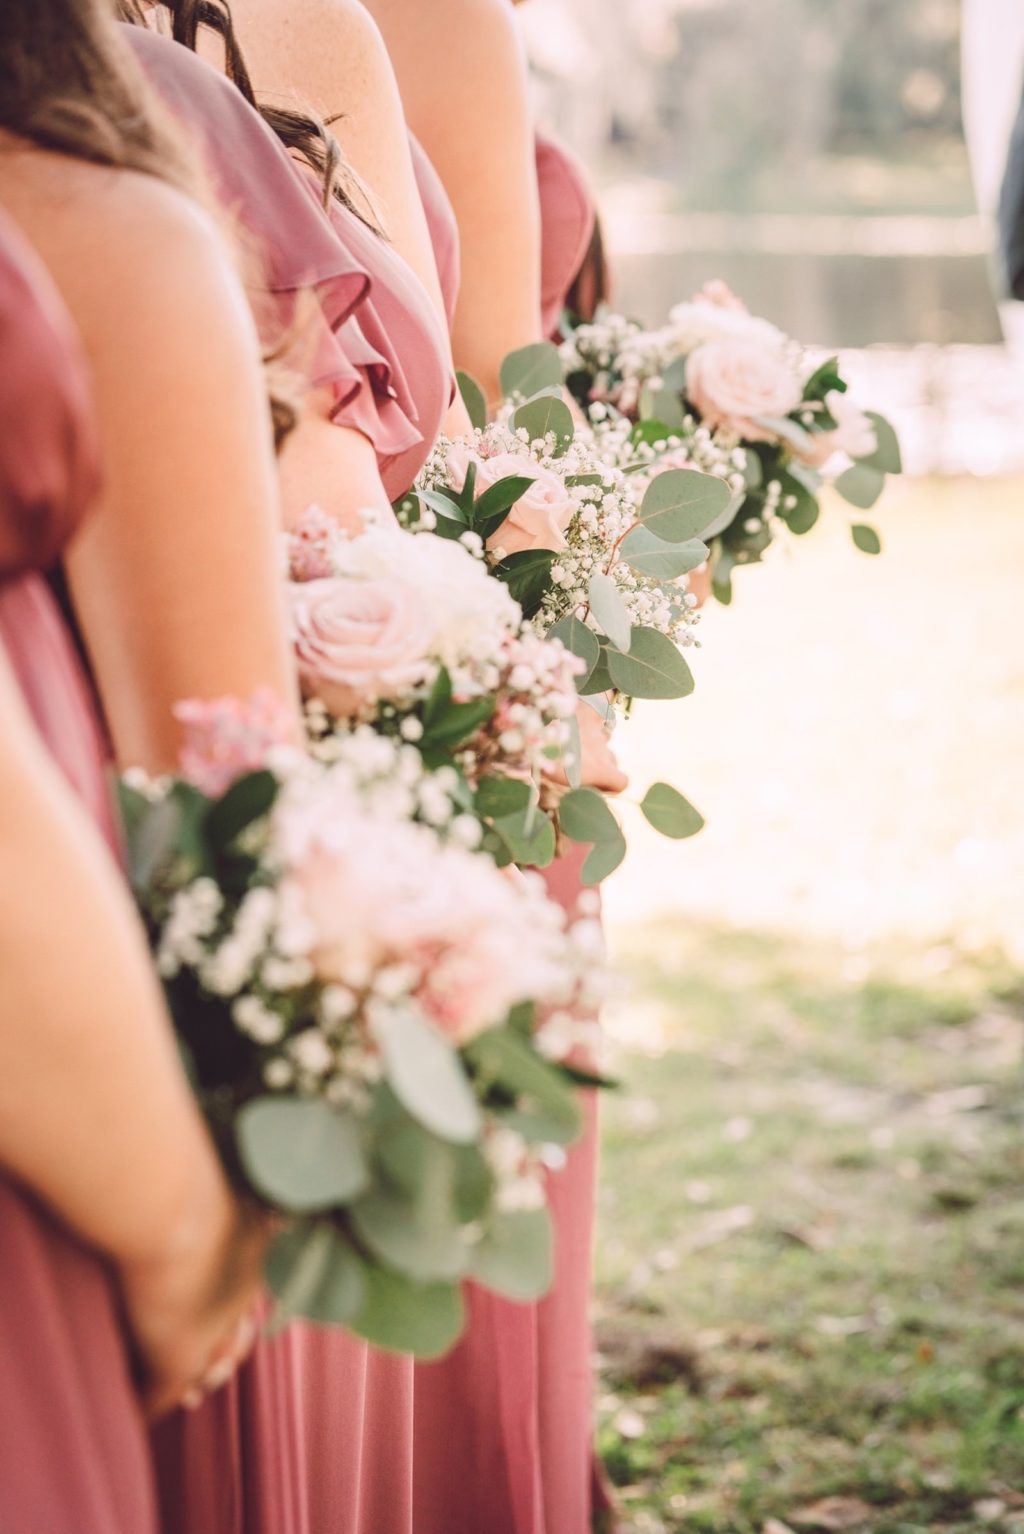 Romantic Shabby Chic Bridesmaids in Mauve/Dusty Rose Dresses Holding Eucalyptus, Baby's Breathe and Blush Pink Roses Floral Bouquets | Tampa Bay Wedding Photographer Bonnie Newman Creative